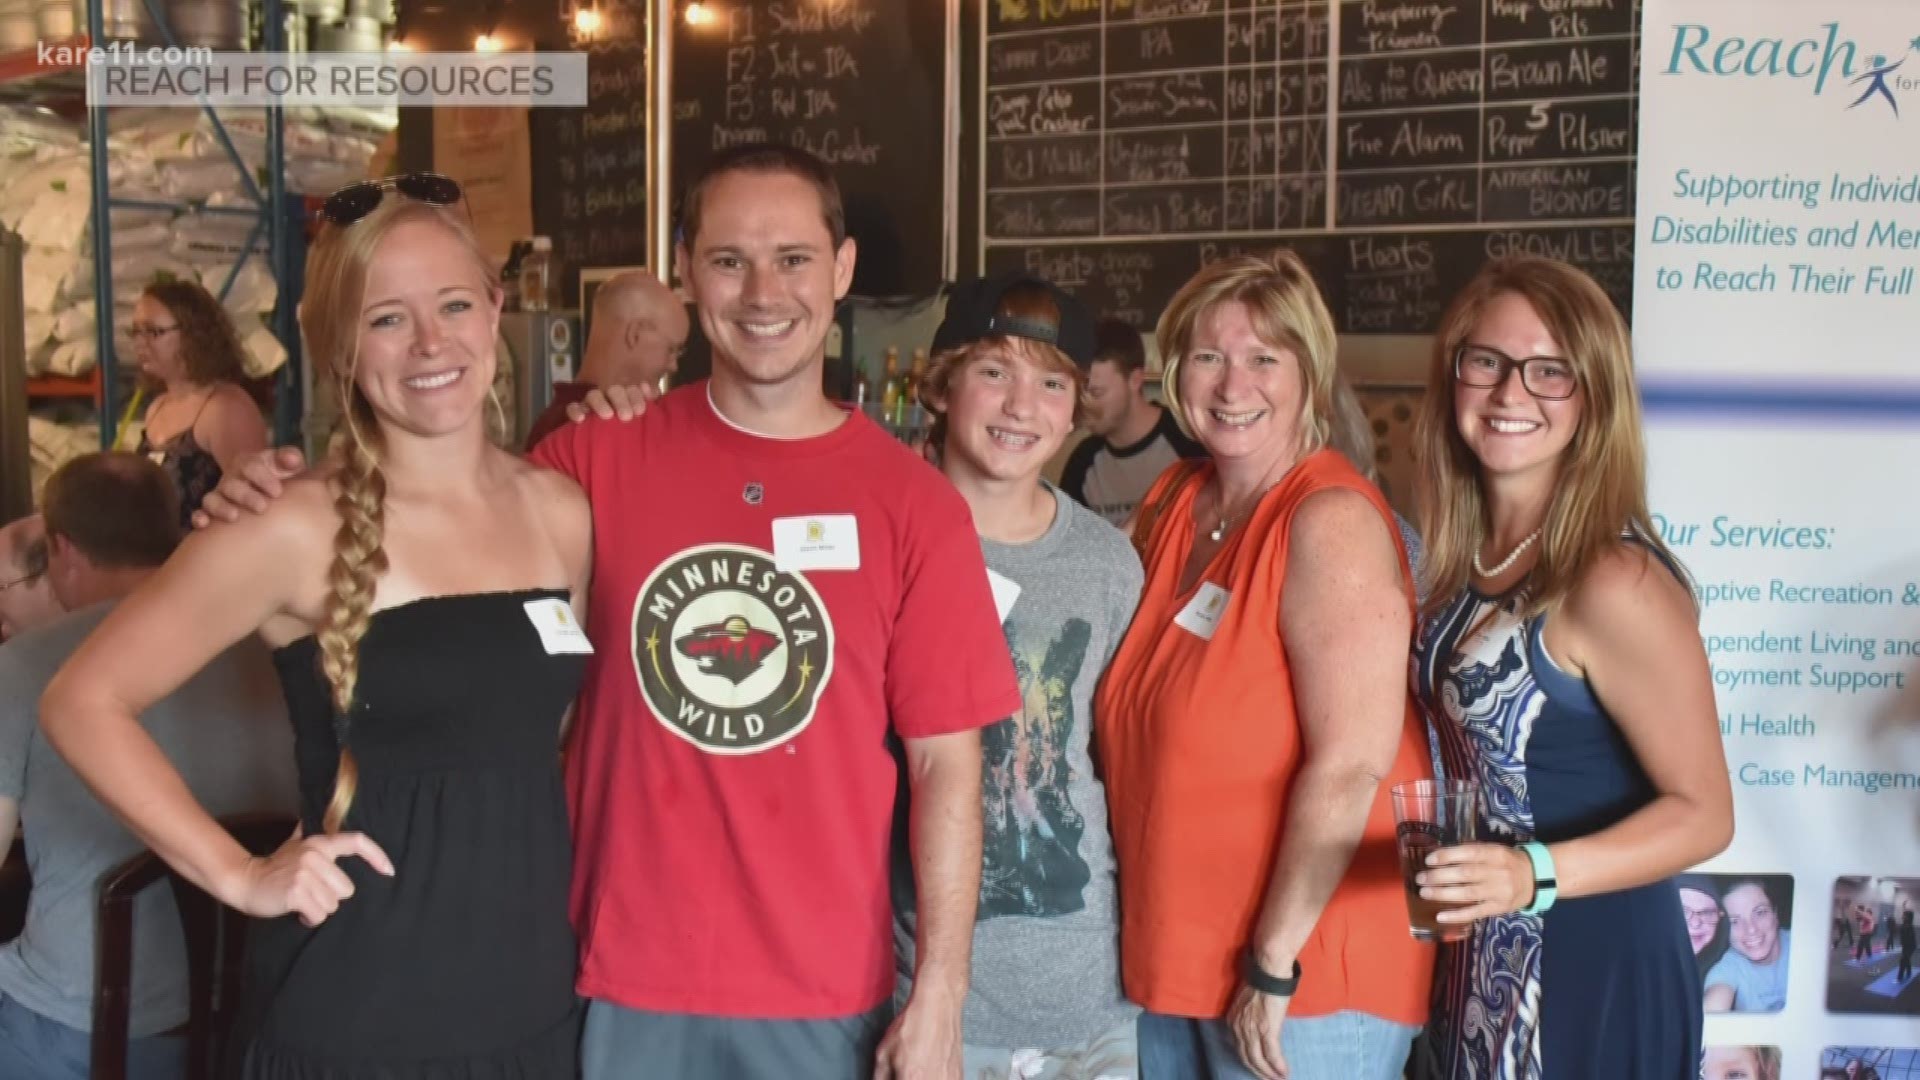 During this summer heat, there is a great way to not only enjoy a fun, refreshing night out, but also support a worthy cause. Reach for Resources is holding a fundraiser called "Reach on Tap" at Steel Toe Brewing on July 17. https://kare11.tv/2urUFaU